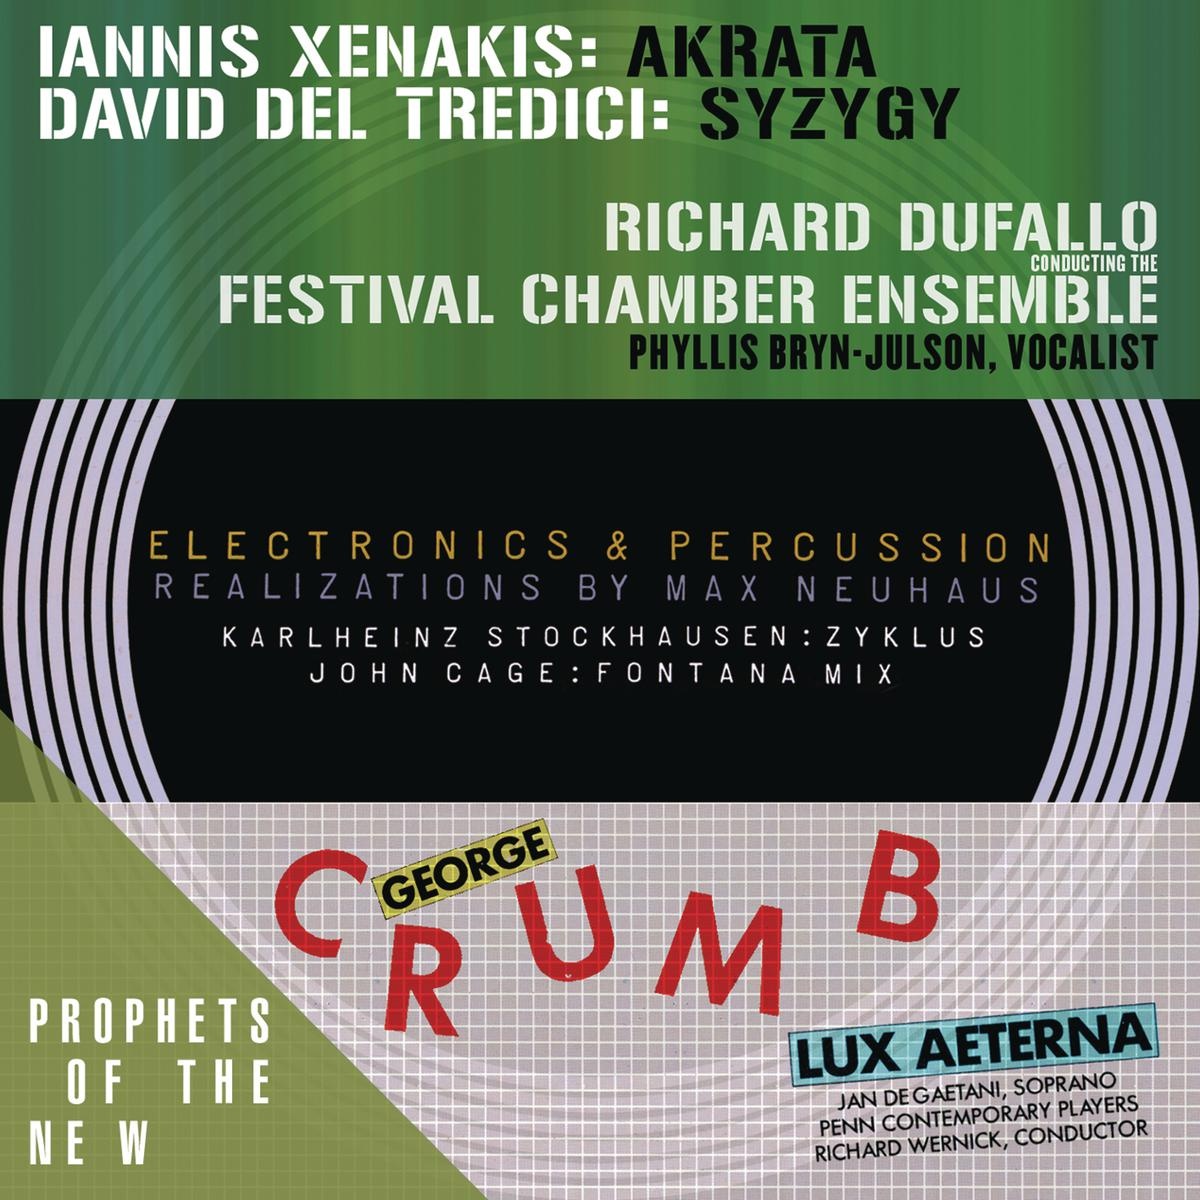 Prophets of the New (Music of Xenakis, Del Tredici, Stockhausen, Cage and Crumb)